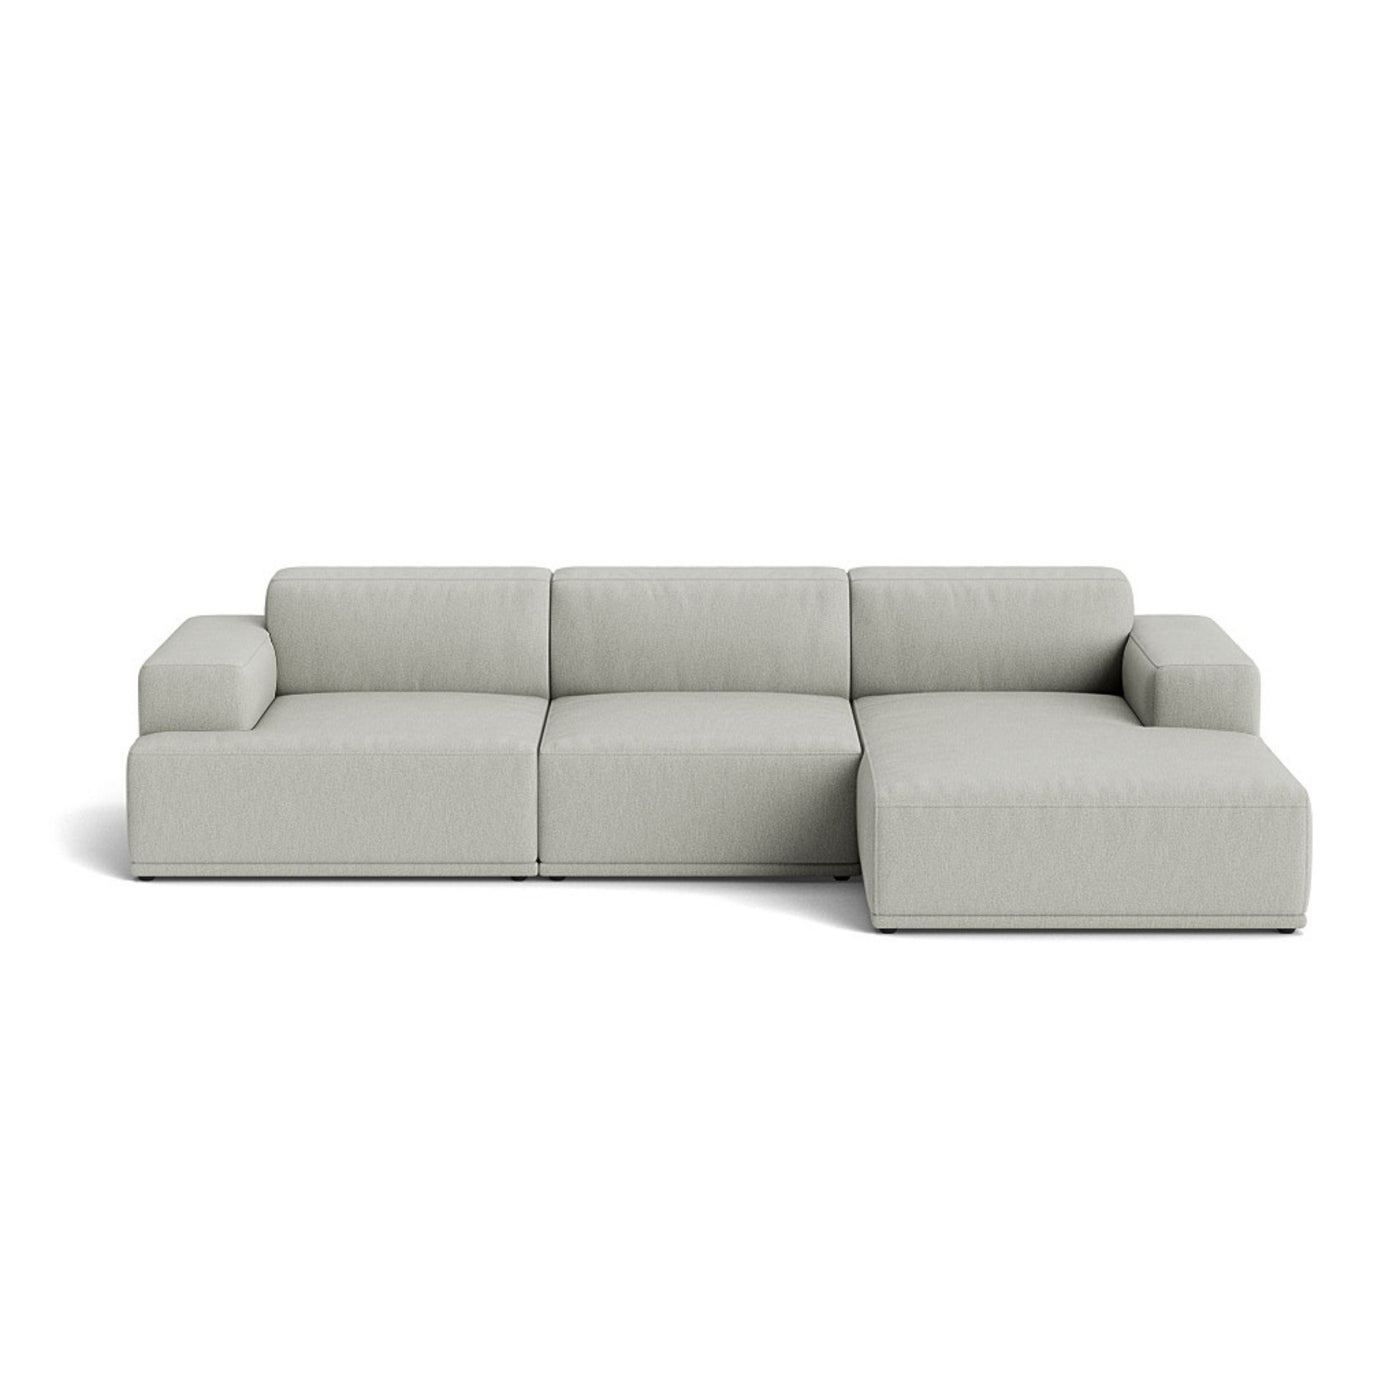 Muuto Connect Soft Modular 3 Seater Sofa, configuration 3. Made-to-order from someday designs. #colour_clay-12